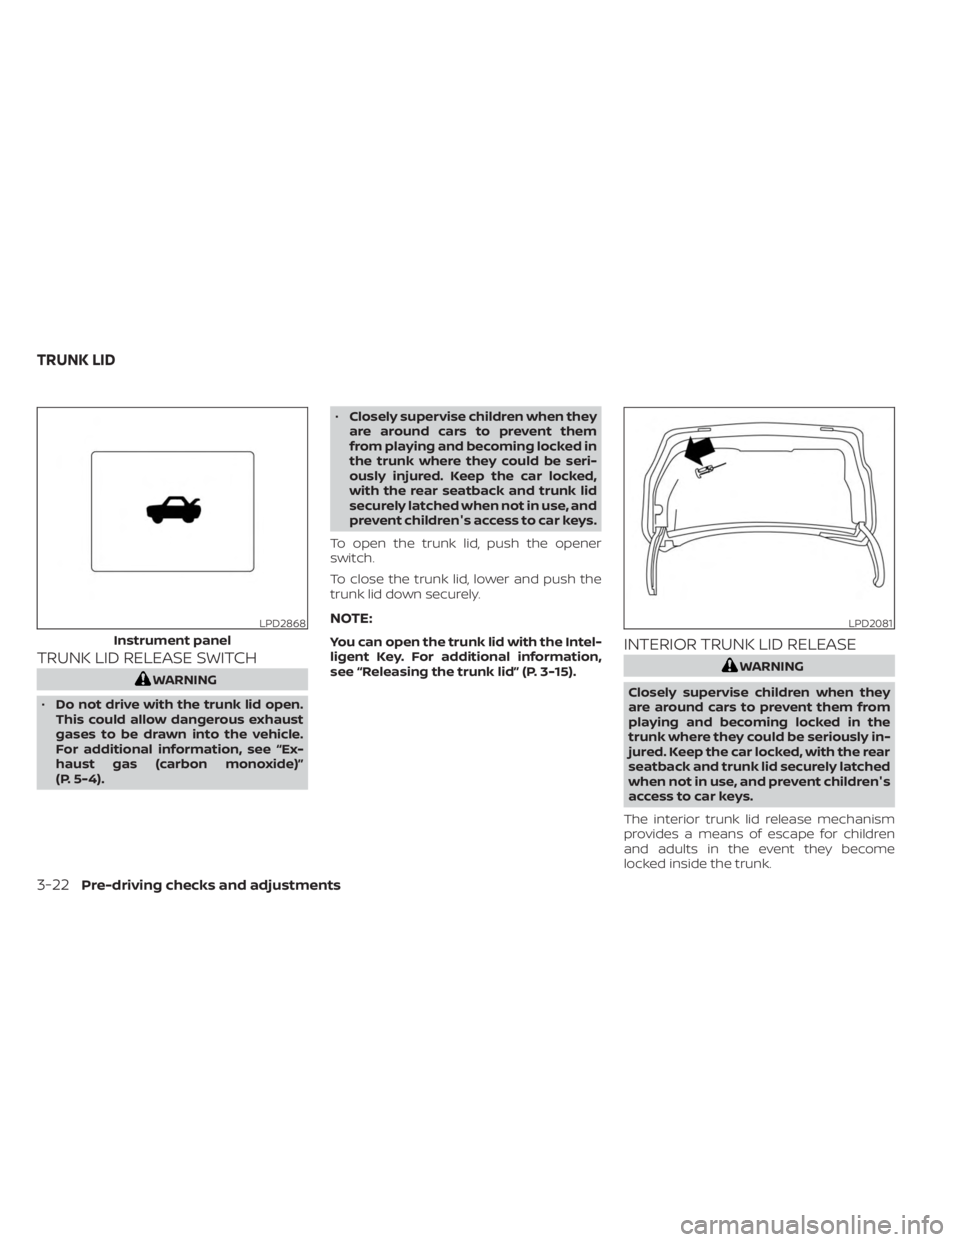 NISSAN SENTRA 2023  Owners Manual TRUNK LID RELEASE SWITCH
WARNING
• Do not drive with the trunk lid open.
This could allow dangerous exhaust
gases to be drawn into the vehicle.
For additional information, see “Ex-
haust gas (carb